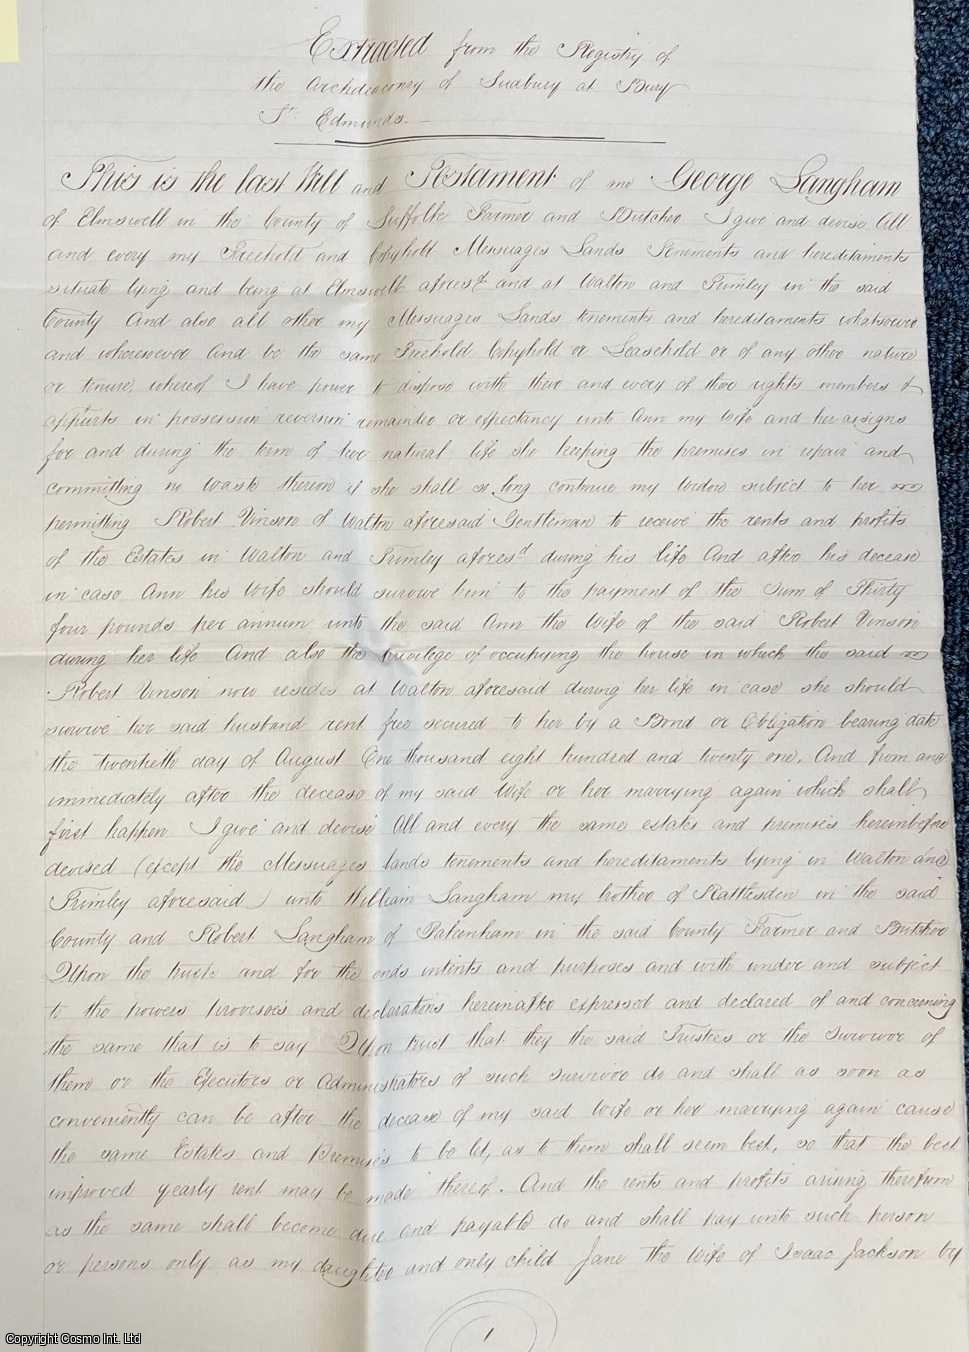 1822 Will - Elmswell, Suffolk. Handwritten 'Extract from the Registry of the Archdeaconry of Sudbury at Bury St. Edmunds' of the Will of Mr George Langham, of Elmswell, Suffolk, farmer and butcher, dated 8th July 1822. Seven neatly handwritten sheets 33 x 42 cms, tied in the left hand corner.